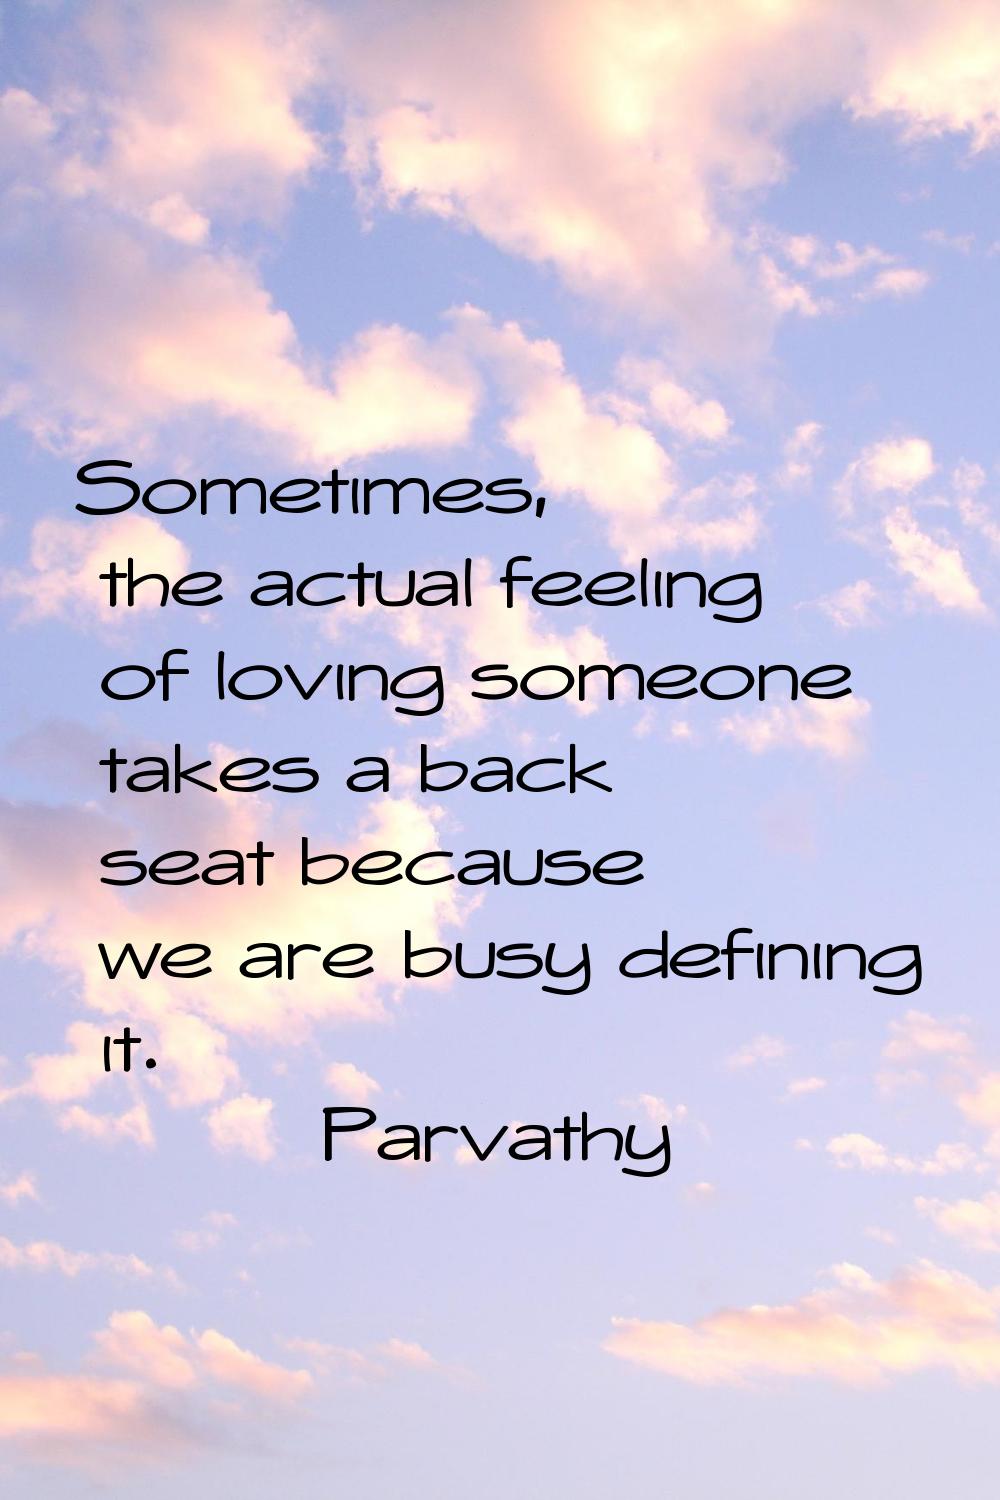 Sometimes, the actual feeling of loving someone takes a back seat because we are busy defining it.